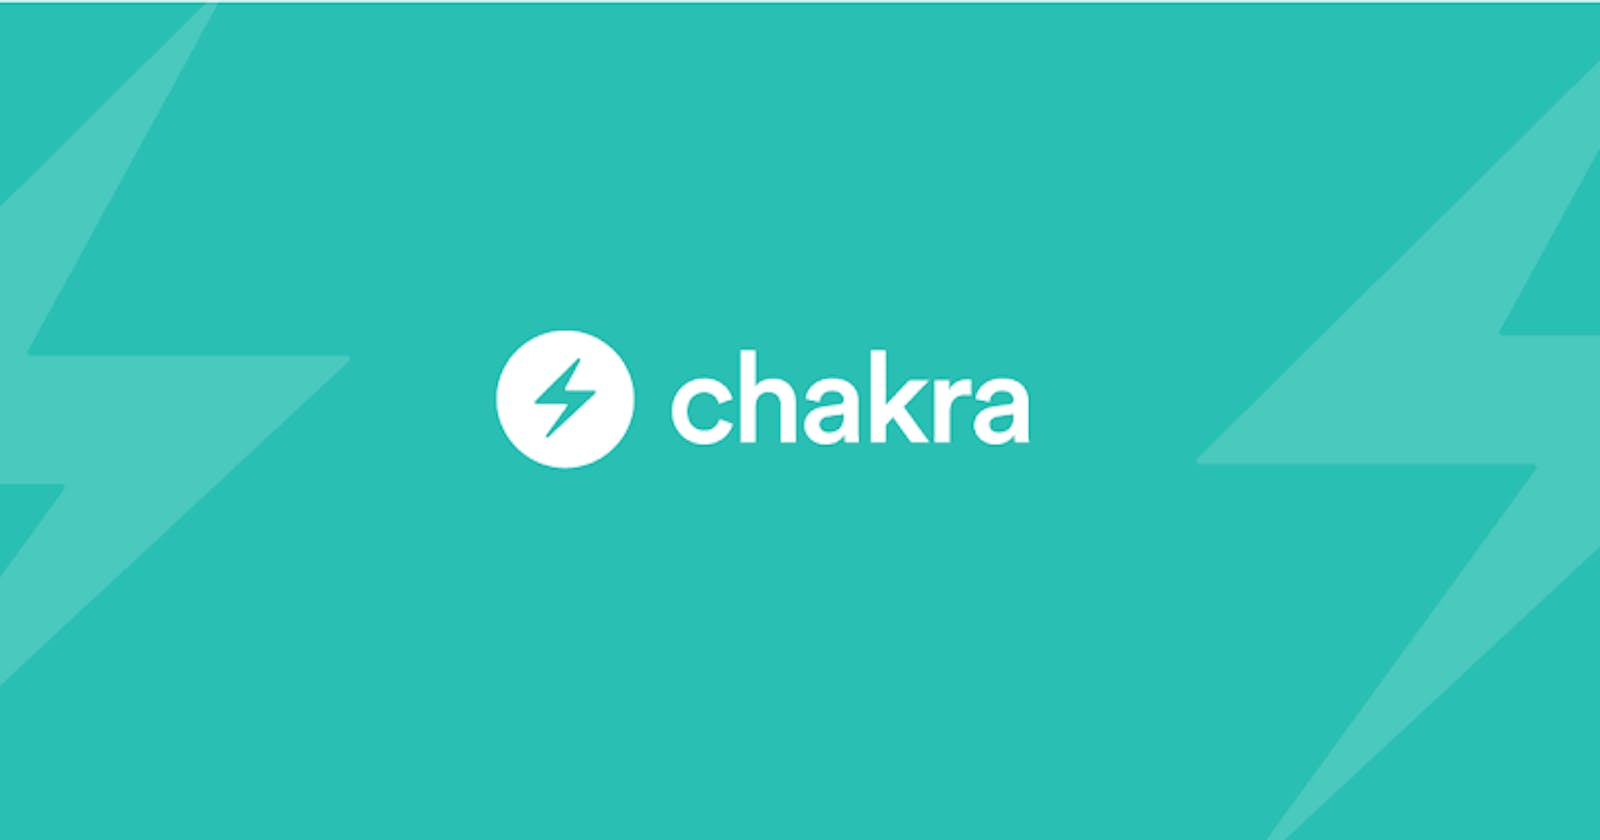 Build a responsive React landing page with Chakra UI and deploy to GitHub pages or Netlify